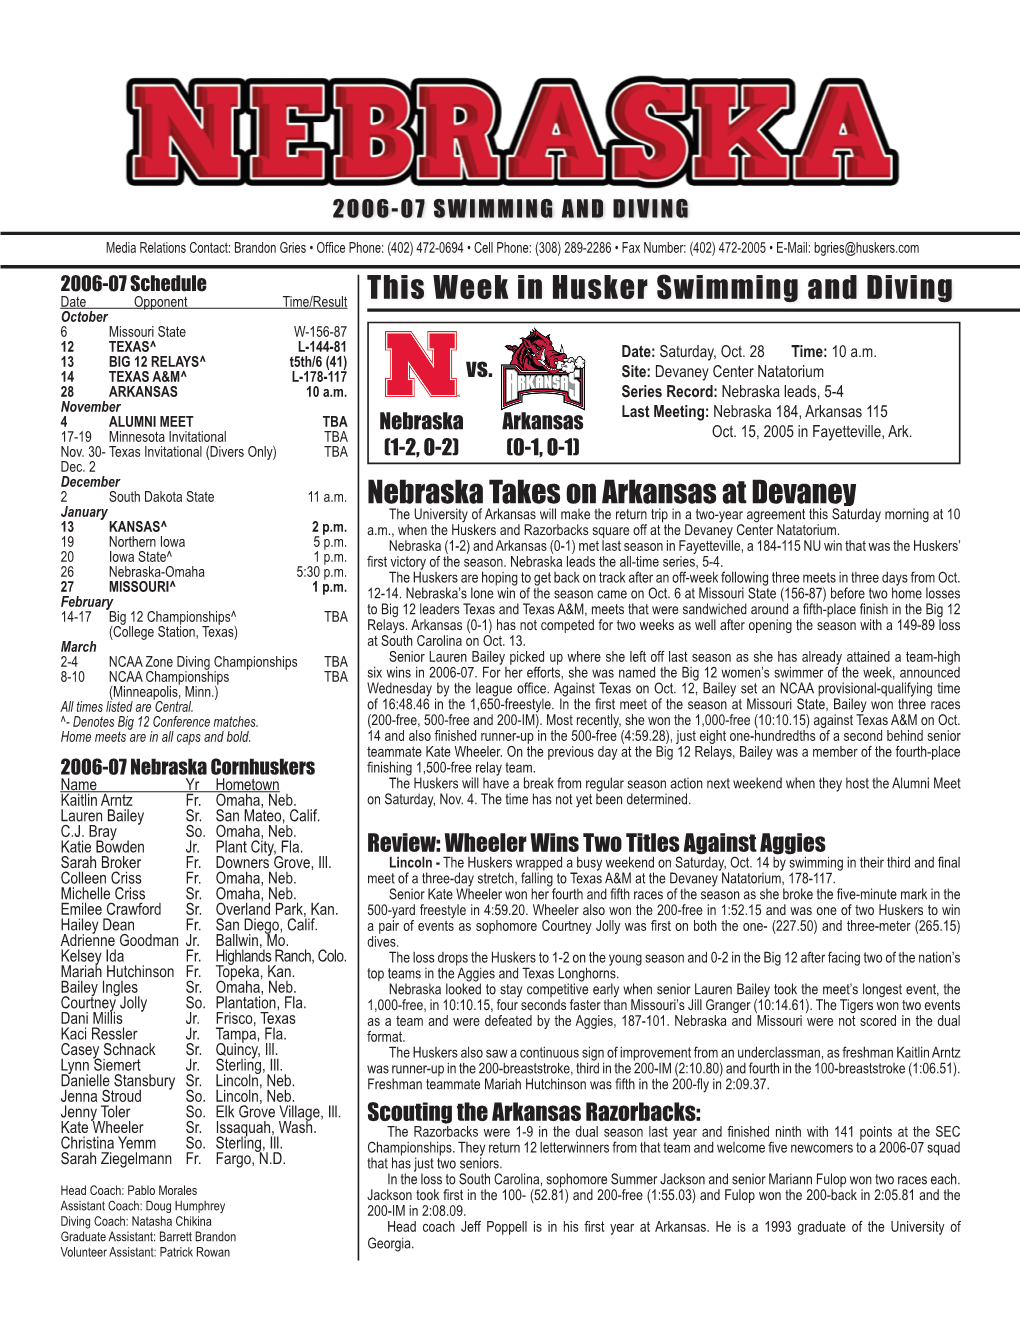 This Week in Husker Swimming and Diving Nebraska Takes On